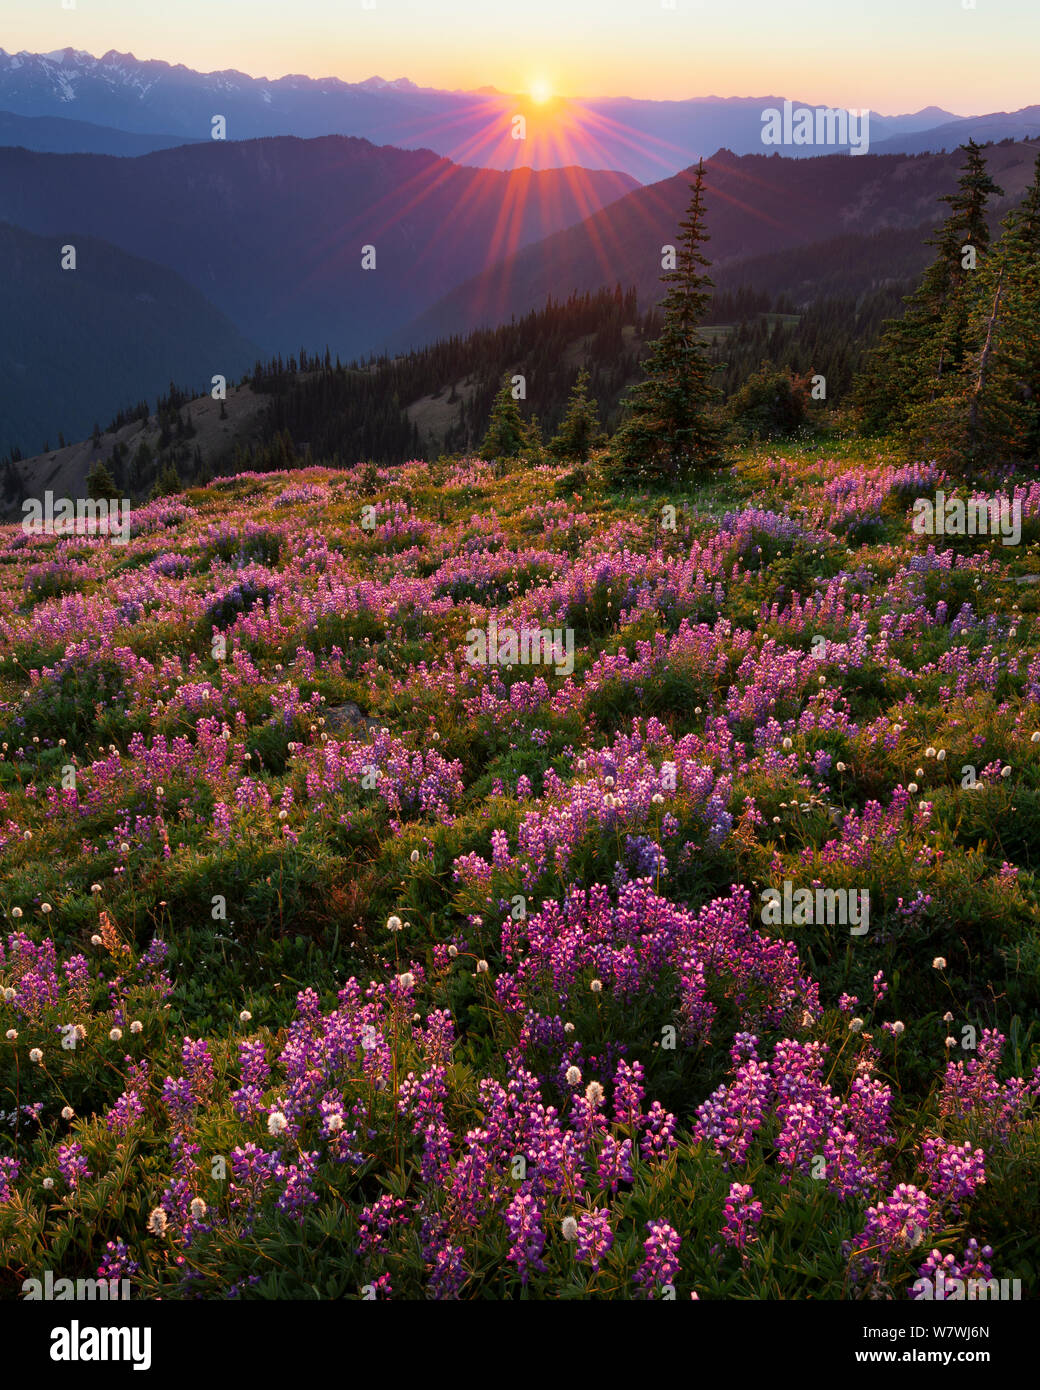 Lupins (Lupinus latifolius) at sunset, near Obstruction Point in Olympic National Park, Washington, USA. August 2011. Stock Photo